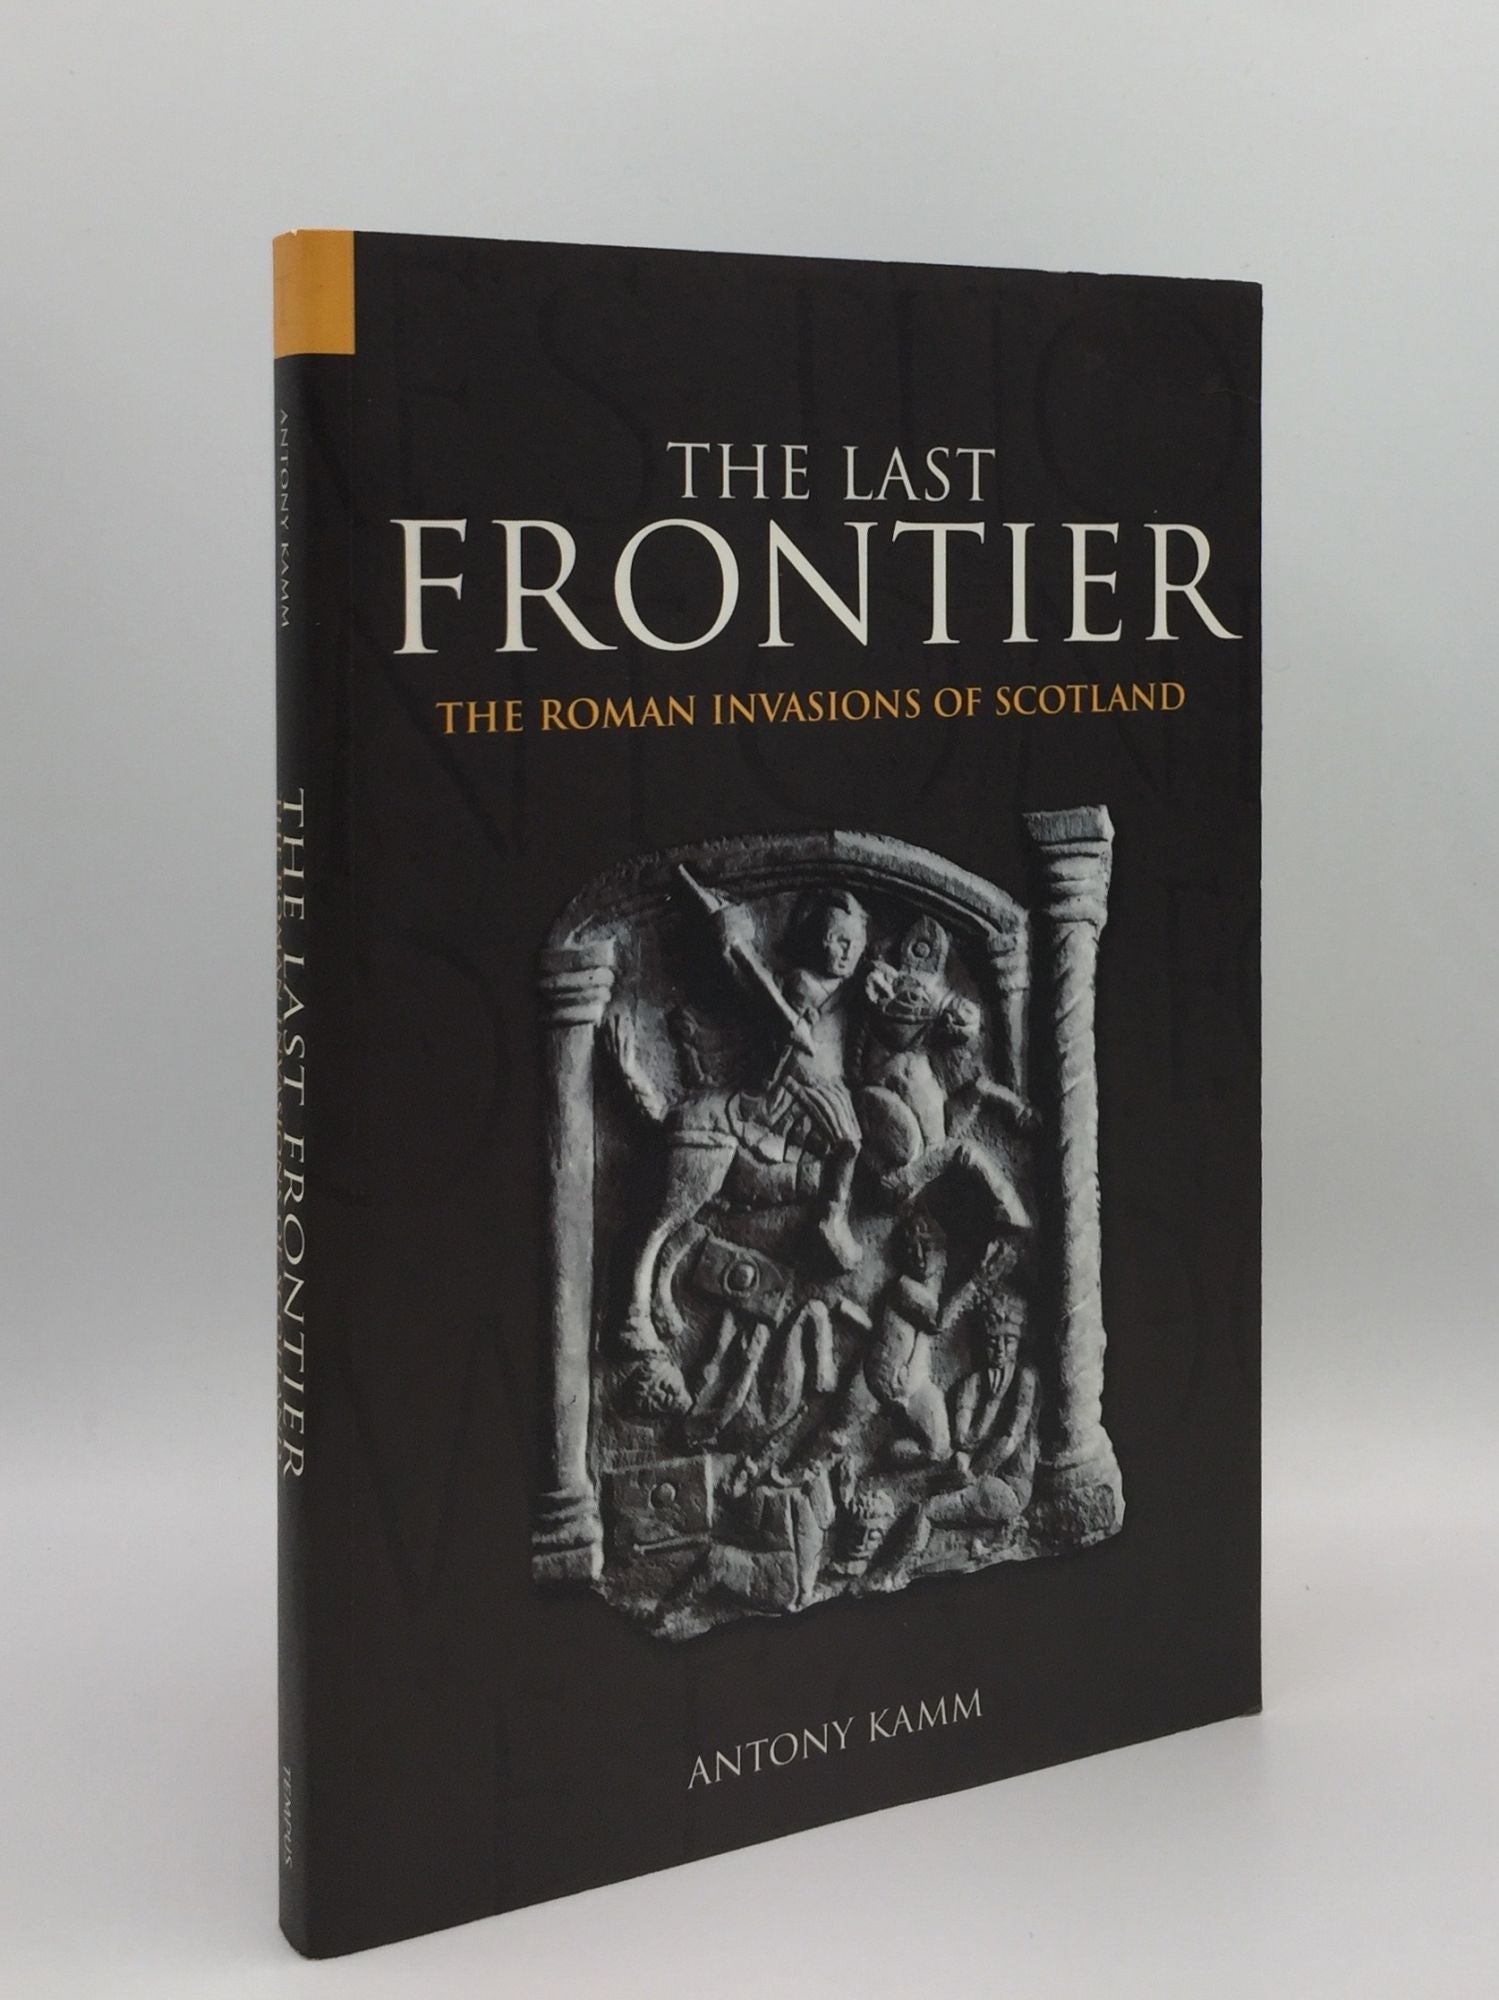 KAMM Anthony - The Last Frontier the Roman Invasions of Scotland